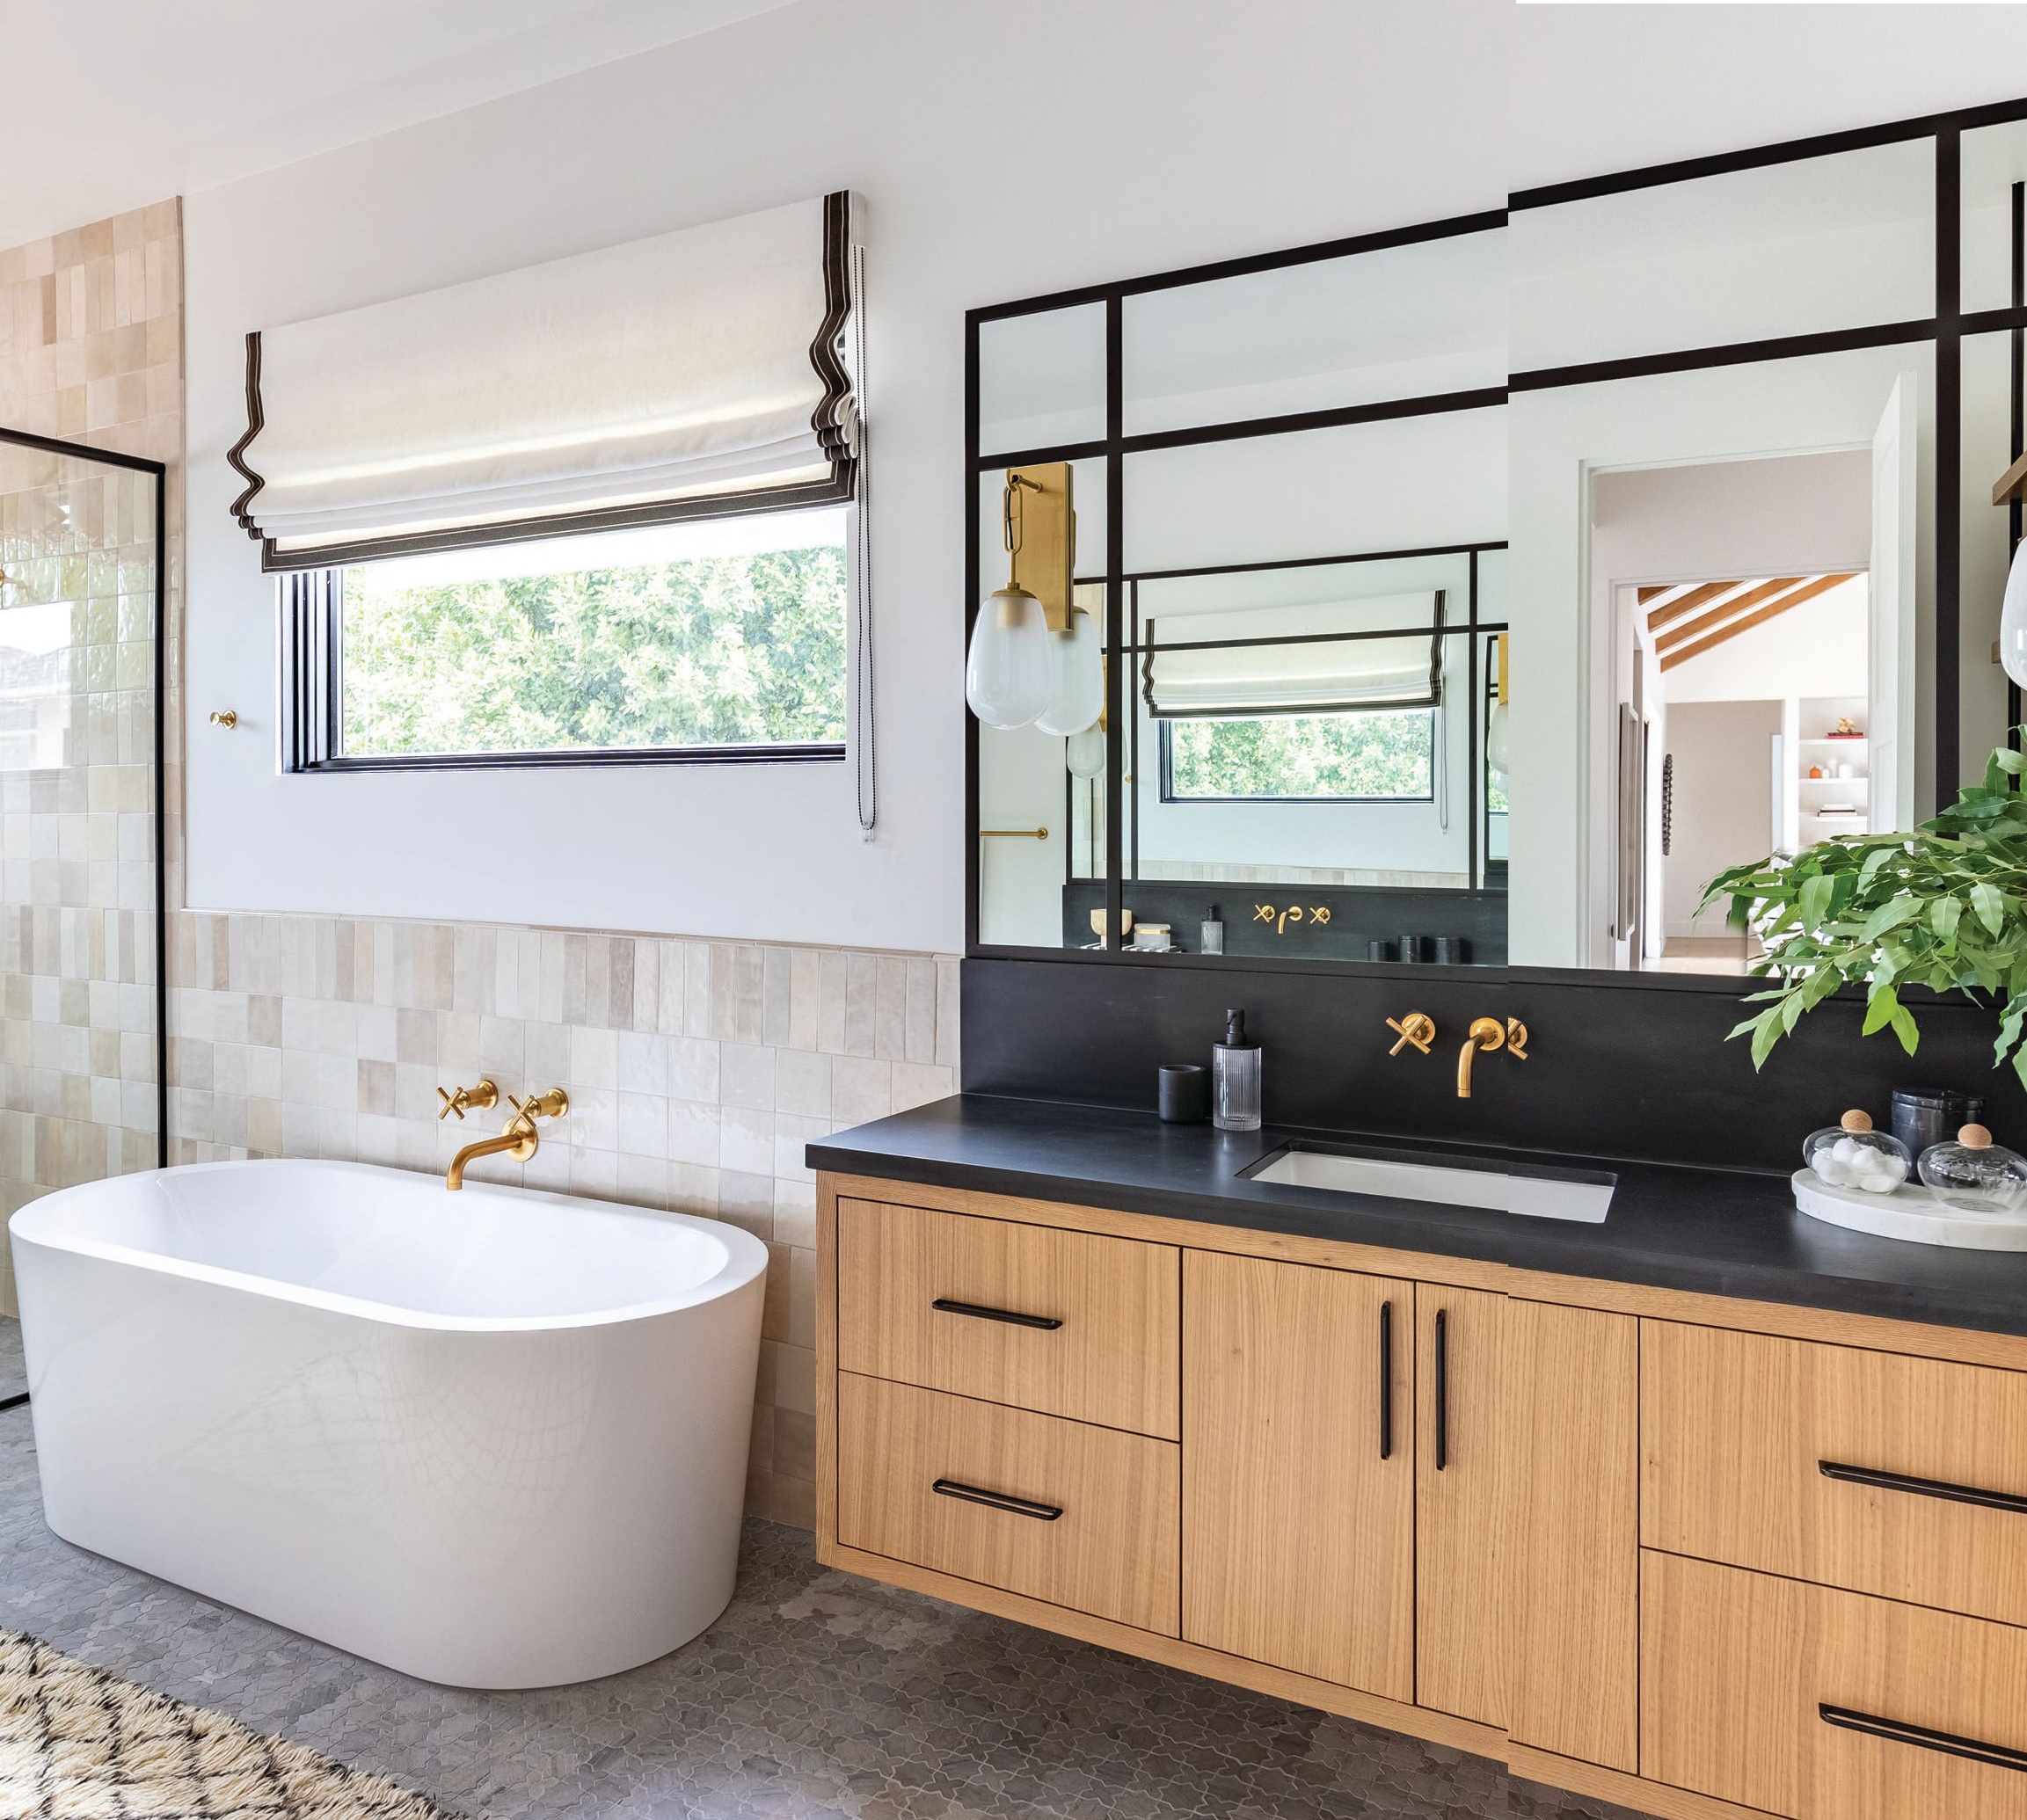 Soft shapes and textures bring warmth to the primary bathroom. Photographed by Flourish Photography